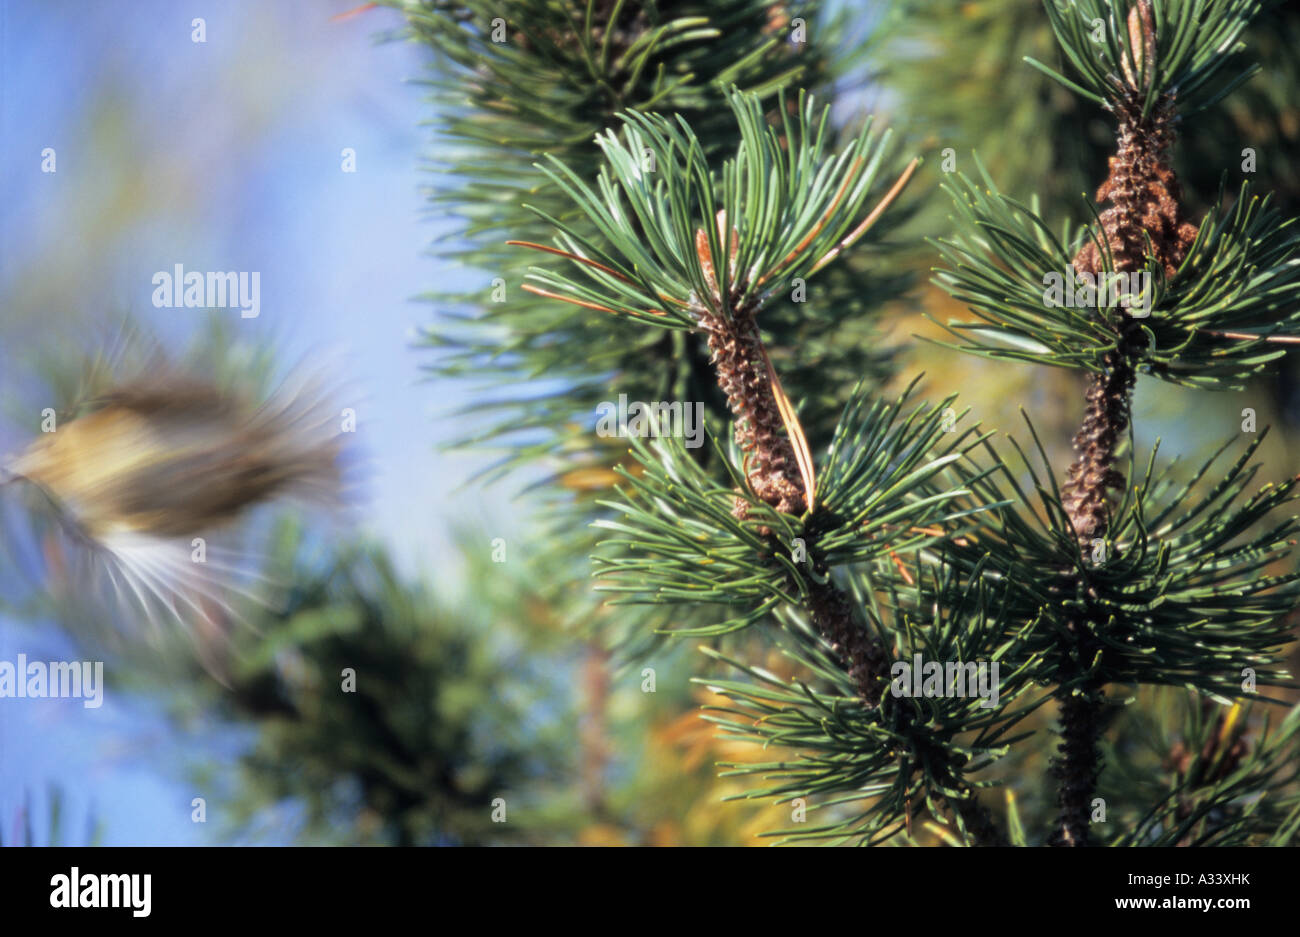 Pine tree sprouts and blurred silhouette of a flying bird Stock Photo